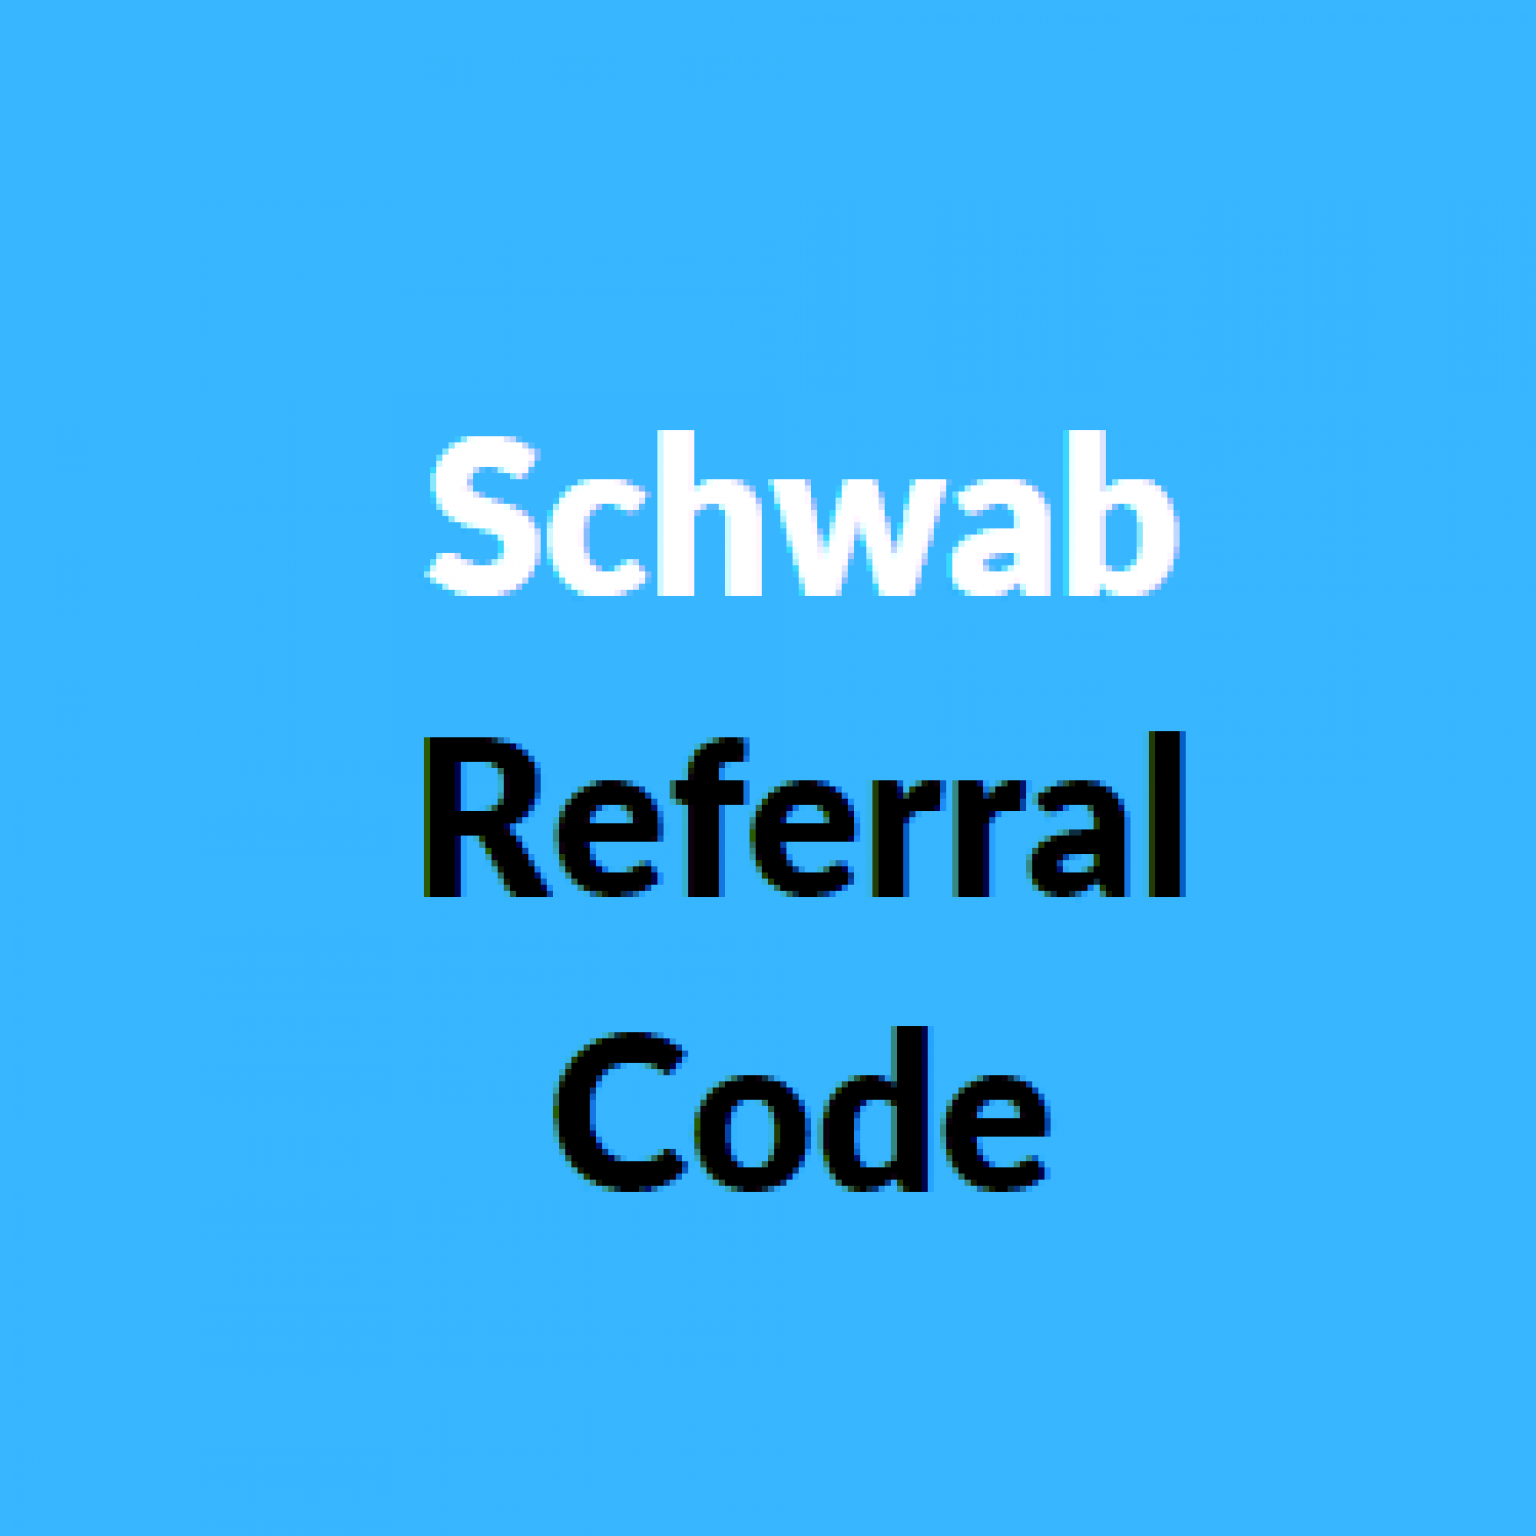 Schwab Referral Code [2022] Share and Earn Up to 500